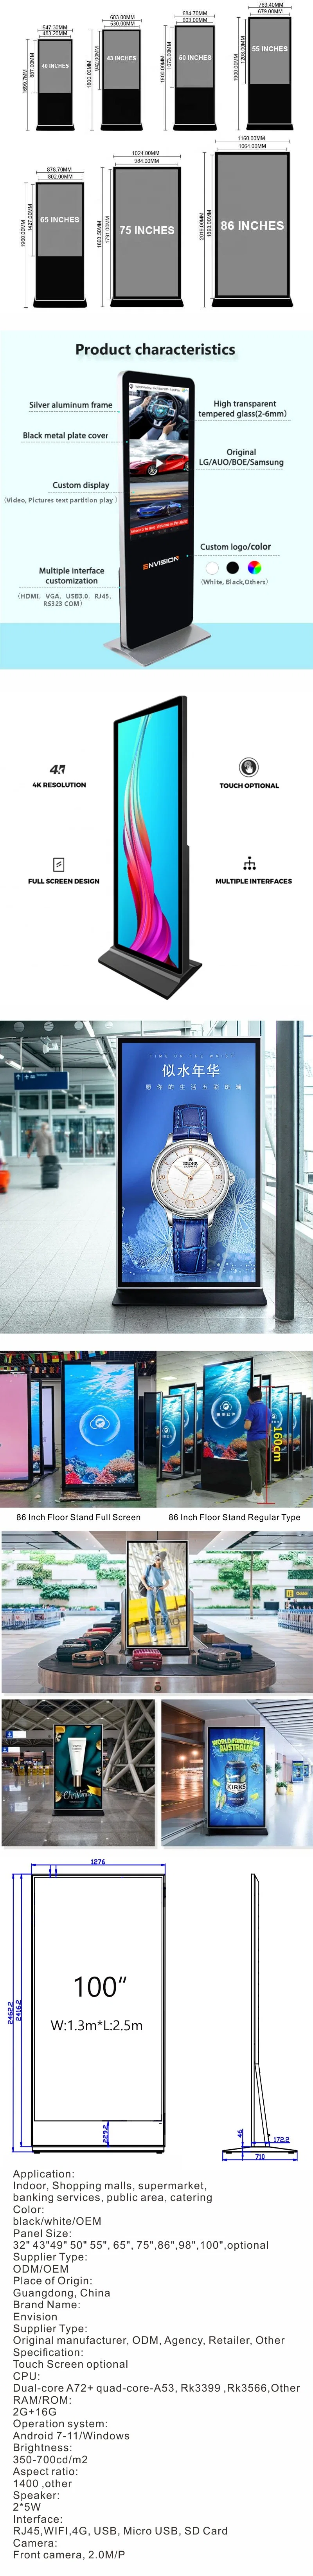 Envision Best Price 43 49 55 65 75 86 LCD LED Double Sided Ultra Slim Digital Signage Interactive Touch Screen Kiosk Commercial Information Advertising Display